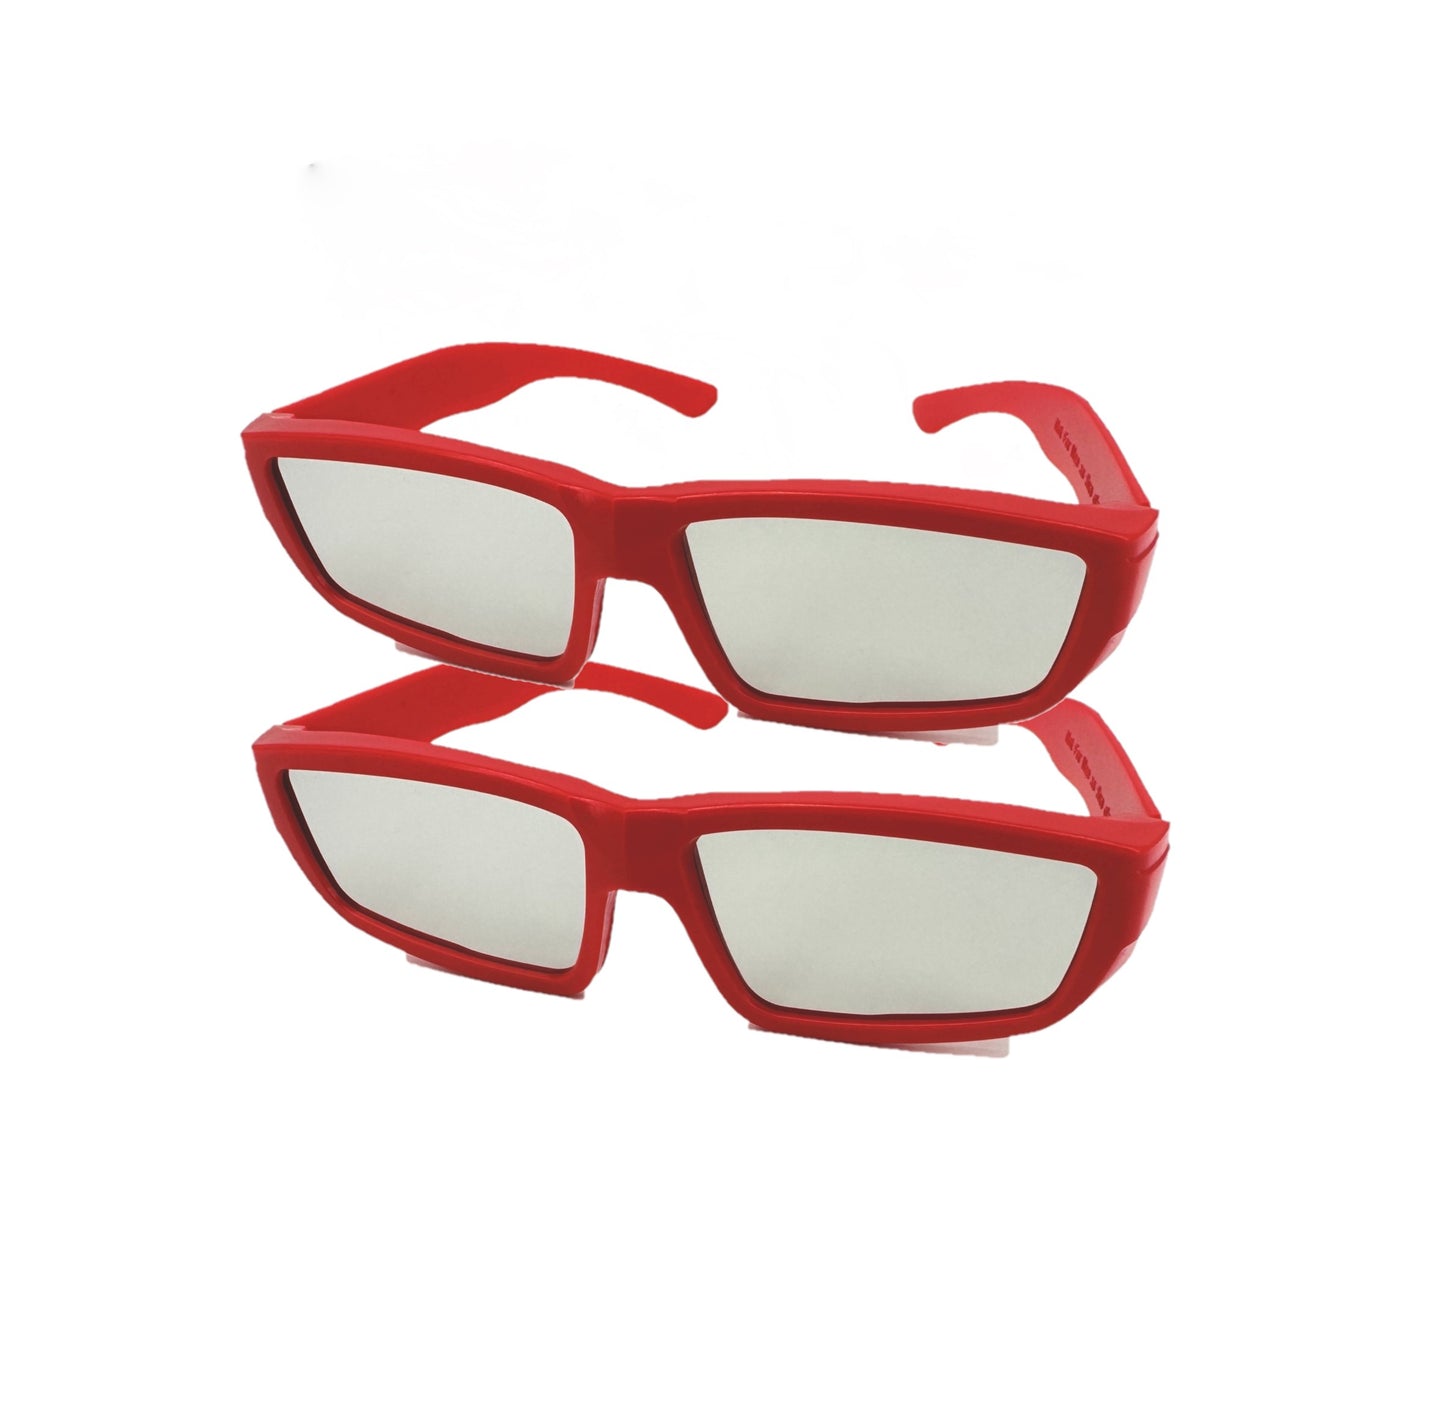 2 Pairs Adult Bookishbunny Solar Eclipse Viewers Plastic Glasses Sun Viewing, Red